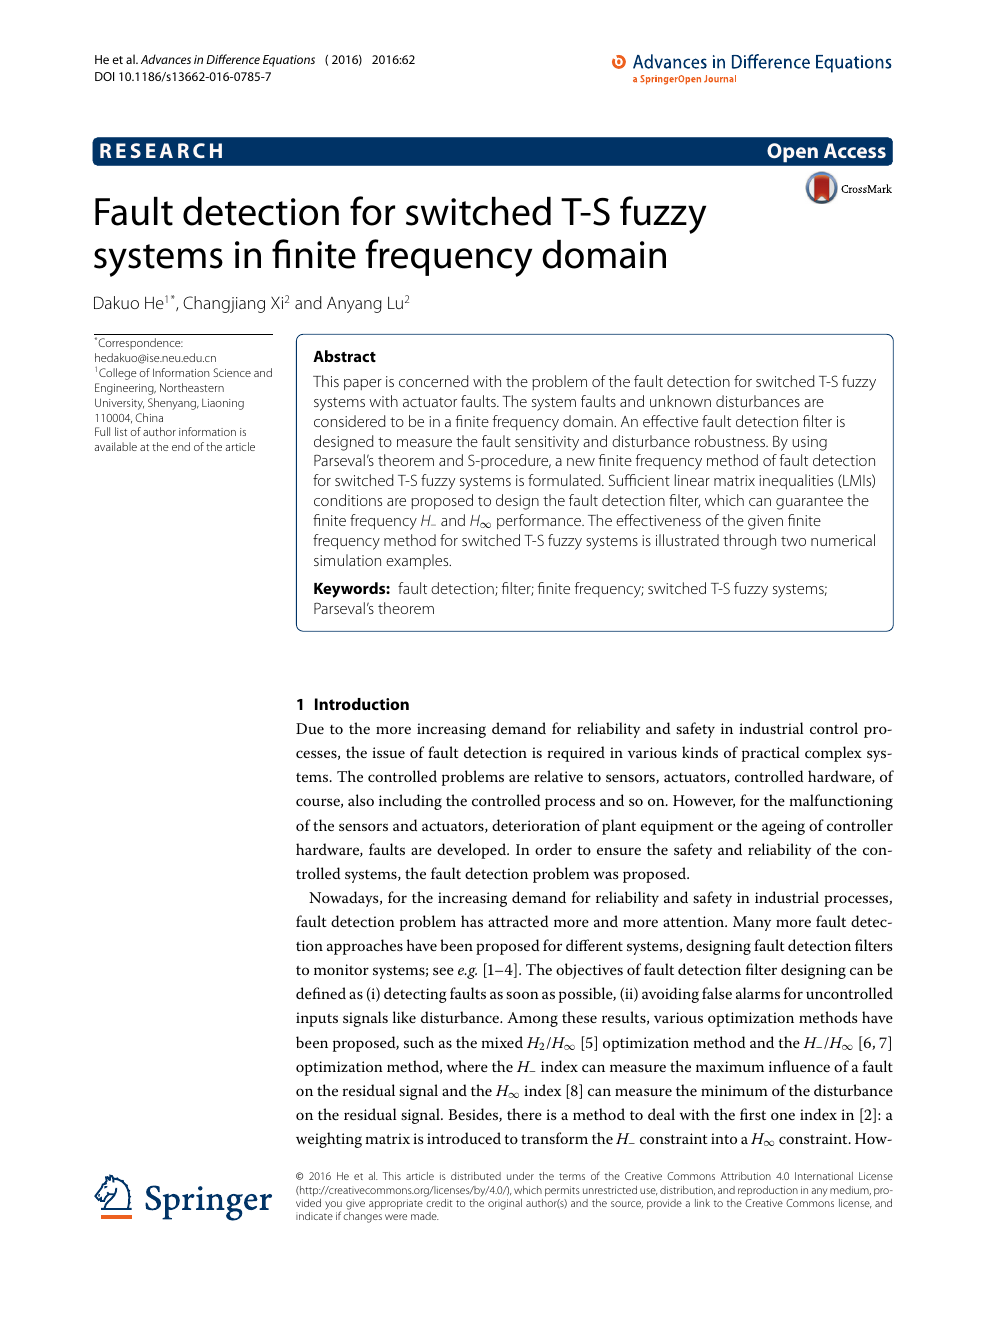 Fault Detection For Switched T S Fuzzy Systems In Finite Frequency Domain Topic Of Research Paper In Mathematics Download Scholarly Article Pdf And Read For Free On Cyberleninka Open Science Hub